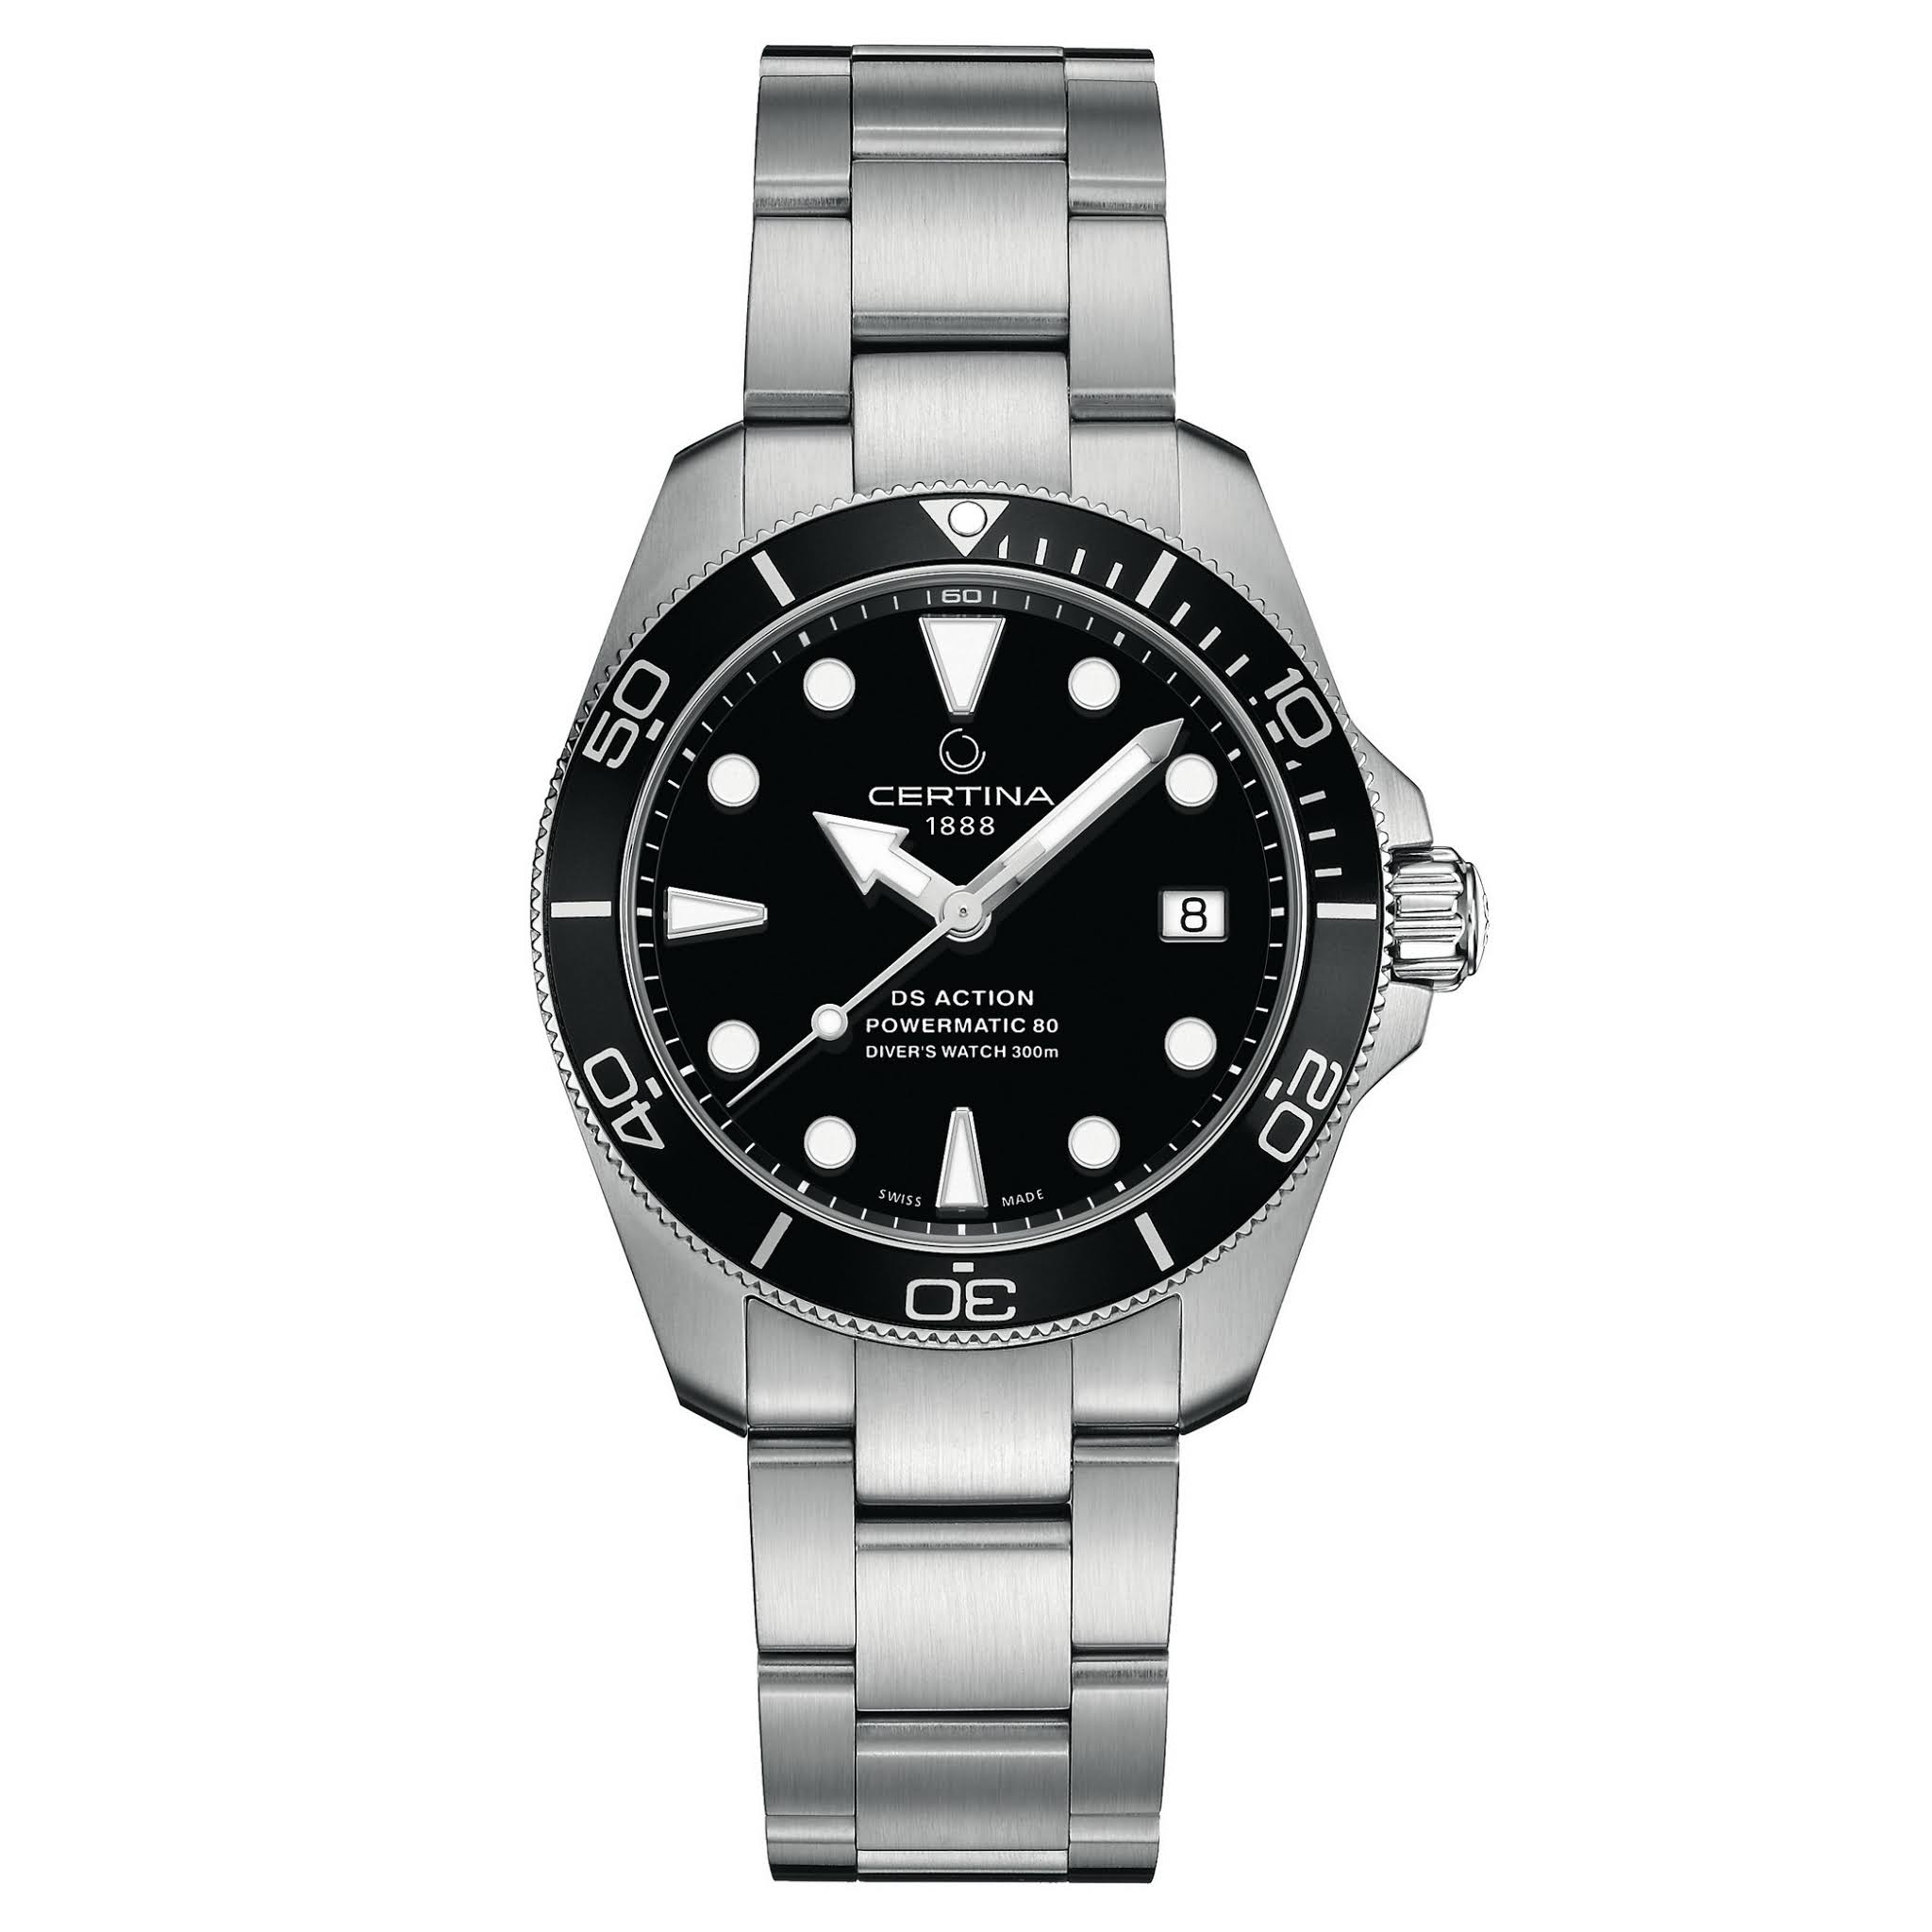 Certina's new DS Action Diver 38mm CERTINA%2BDS%2BAction%2BDiver%2B38mm%2B06